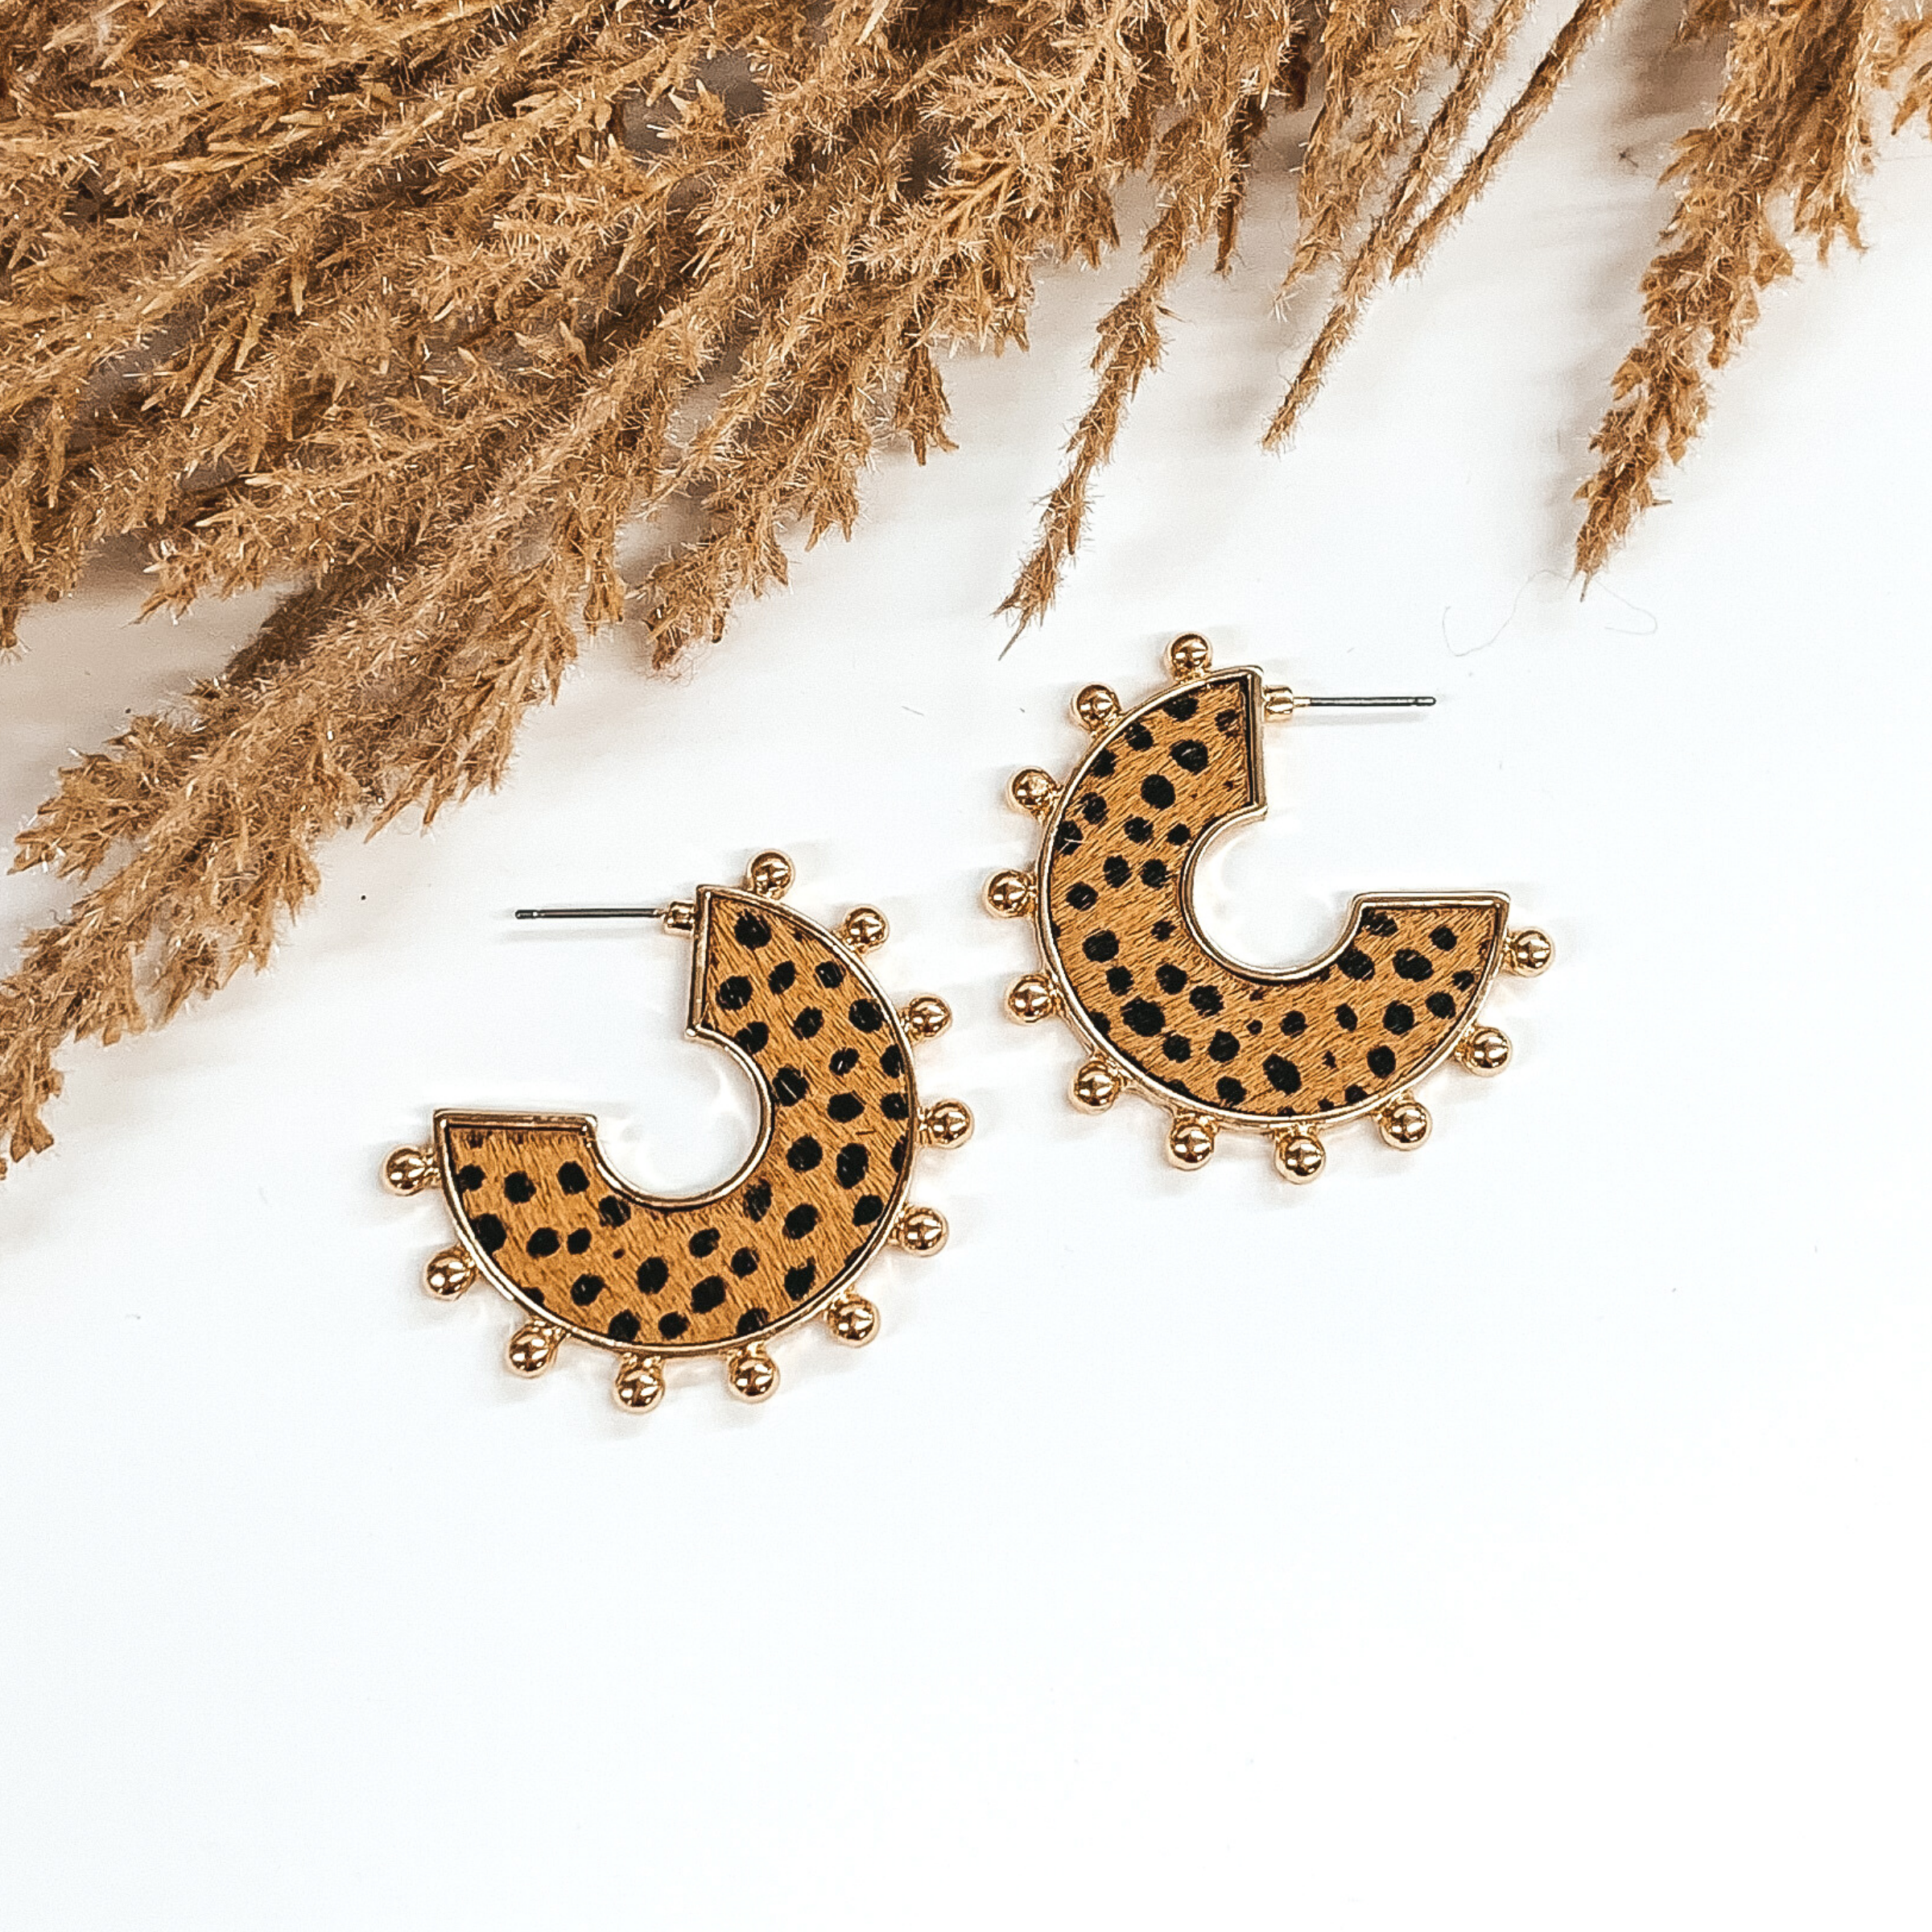 Flat hoops with brown animal hide inlay with black dotted pattern. These hoops have gold beads on the edge of the earrings. These earrings are pictured o  white background with tan floral at the top of the page. 